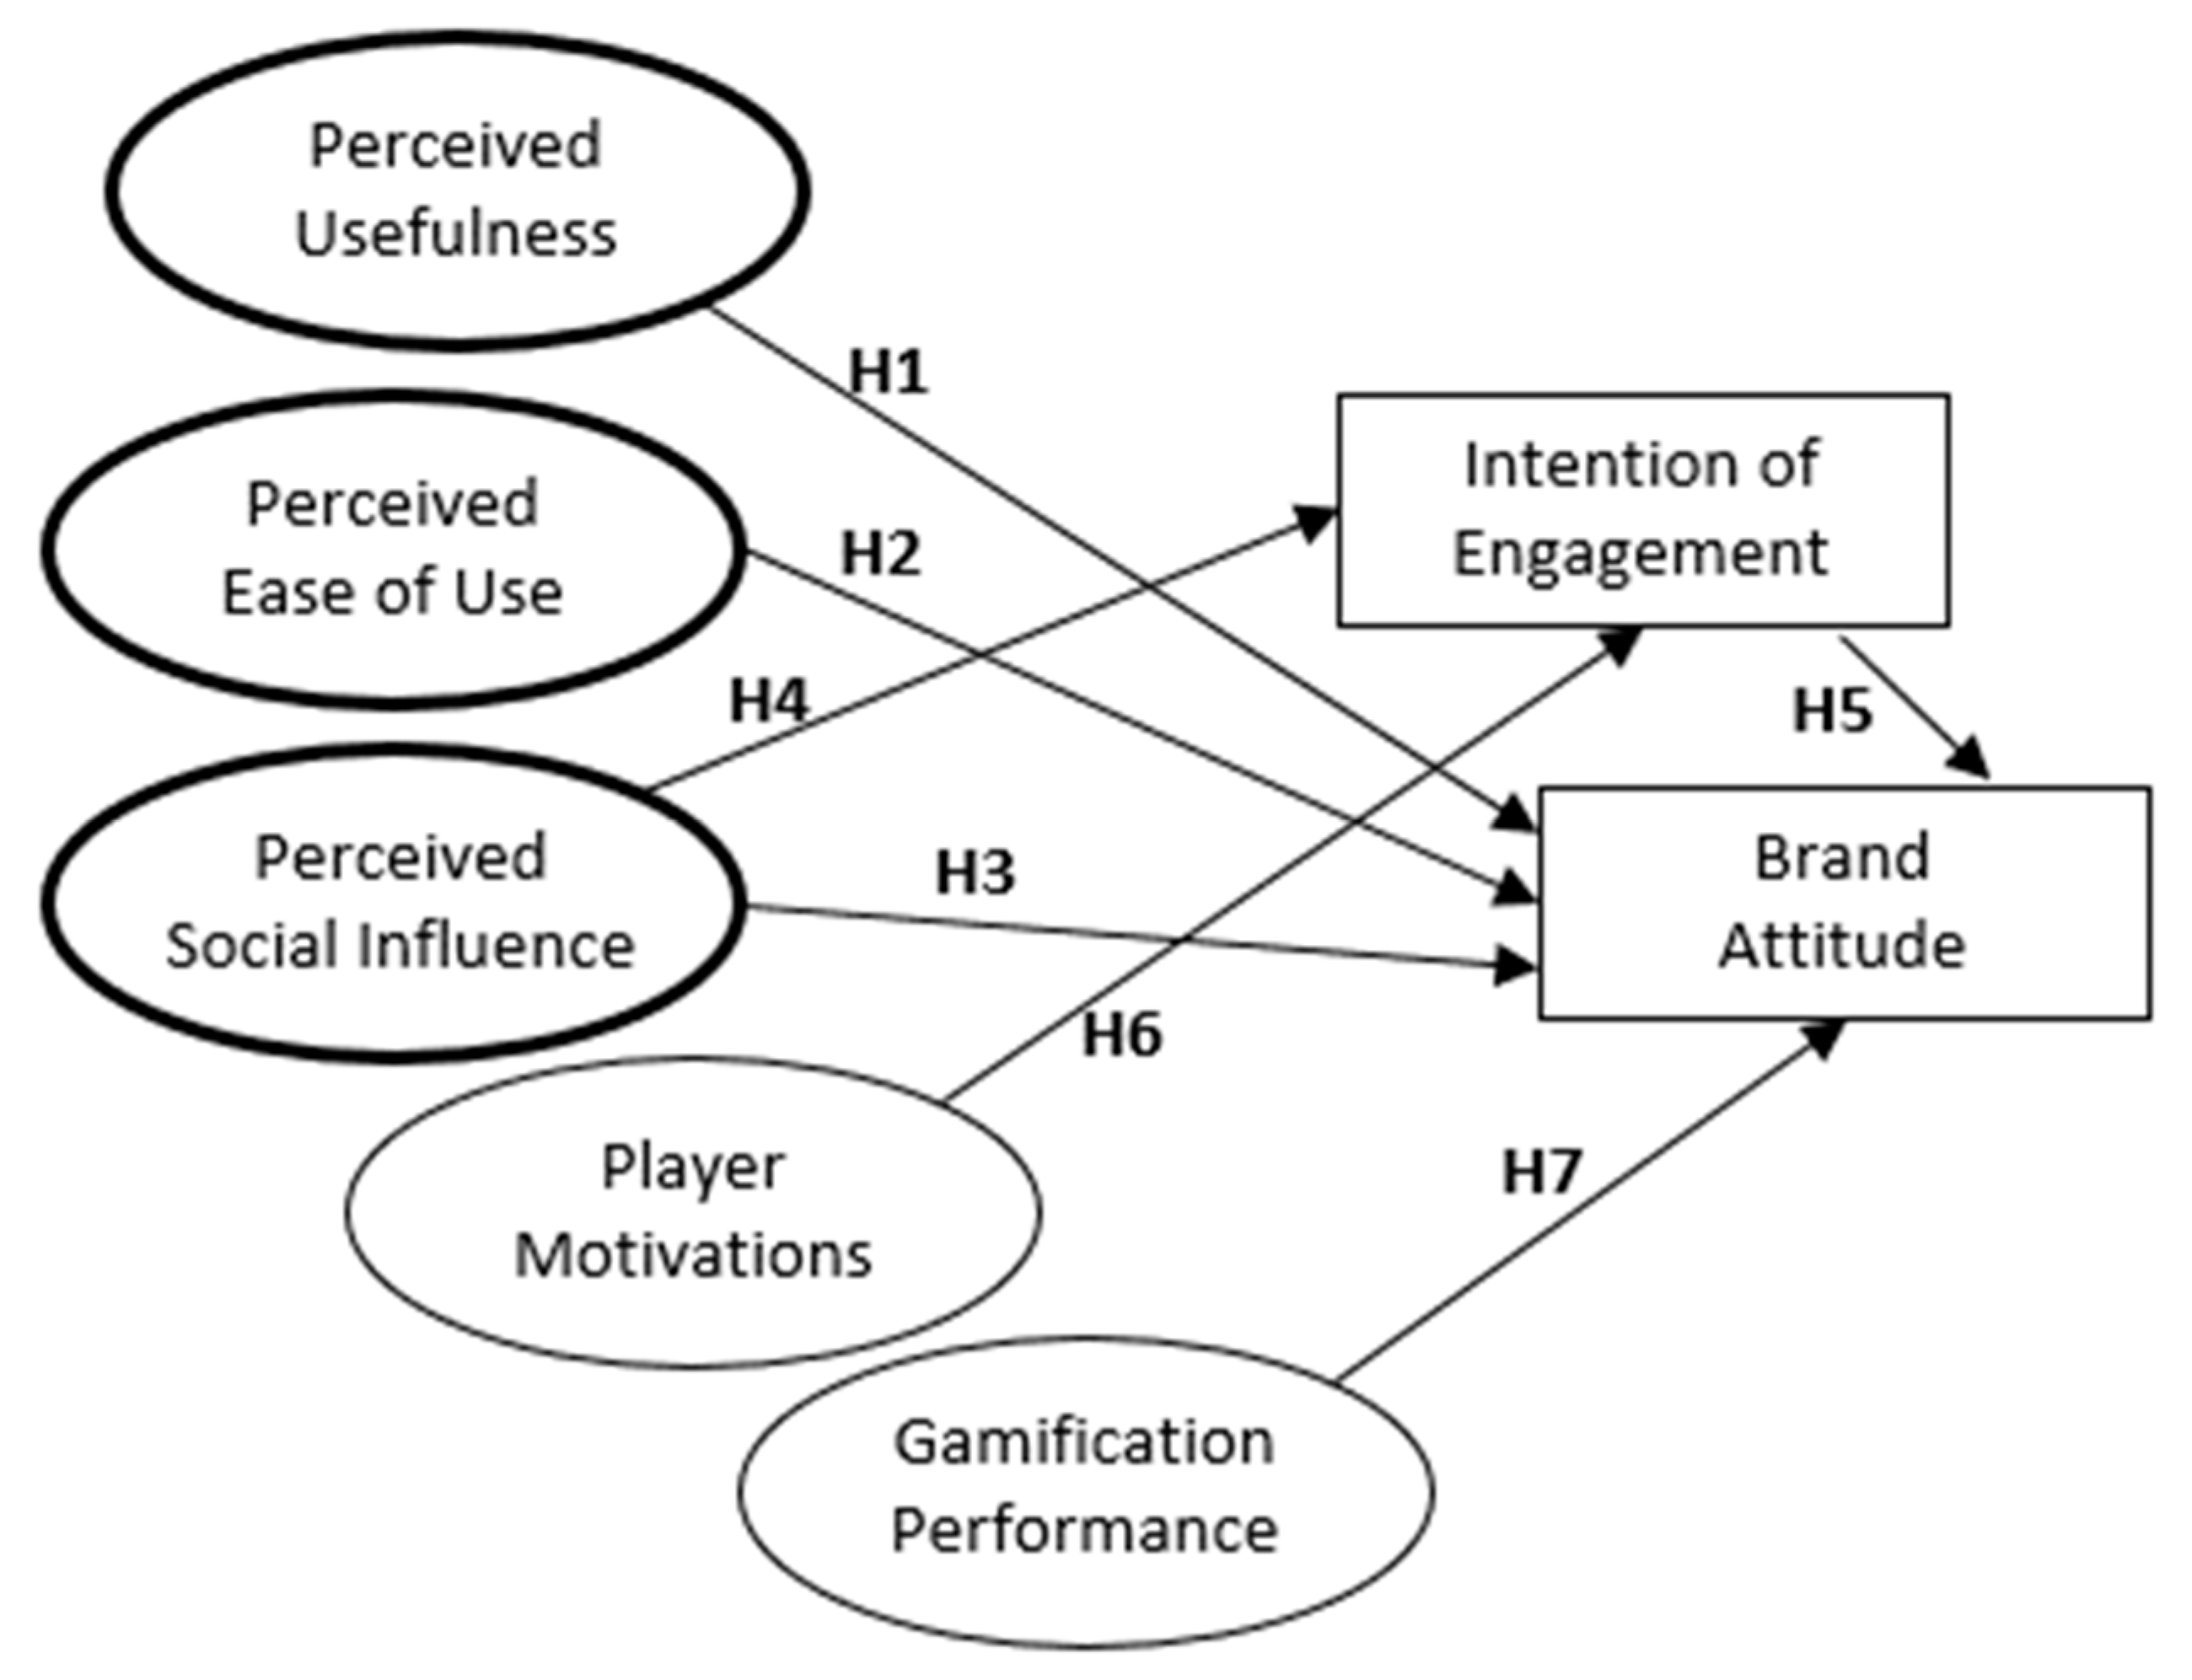 Administrative Sciences | Free Full-Text | How Can Gamified Applications  Drive Engagement and Brand Attitude? The Case of Nike Run Club Application